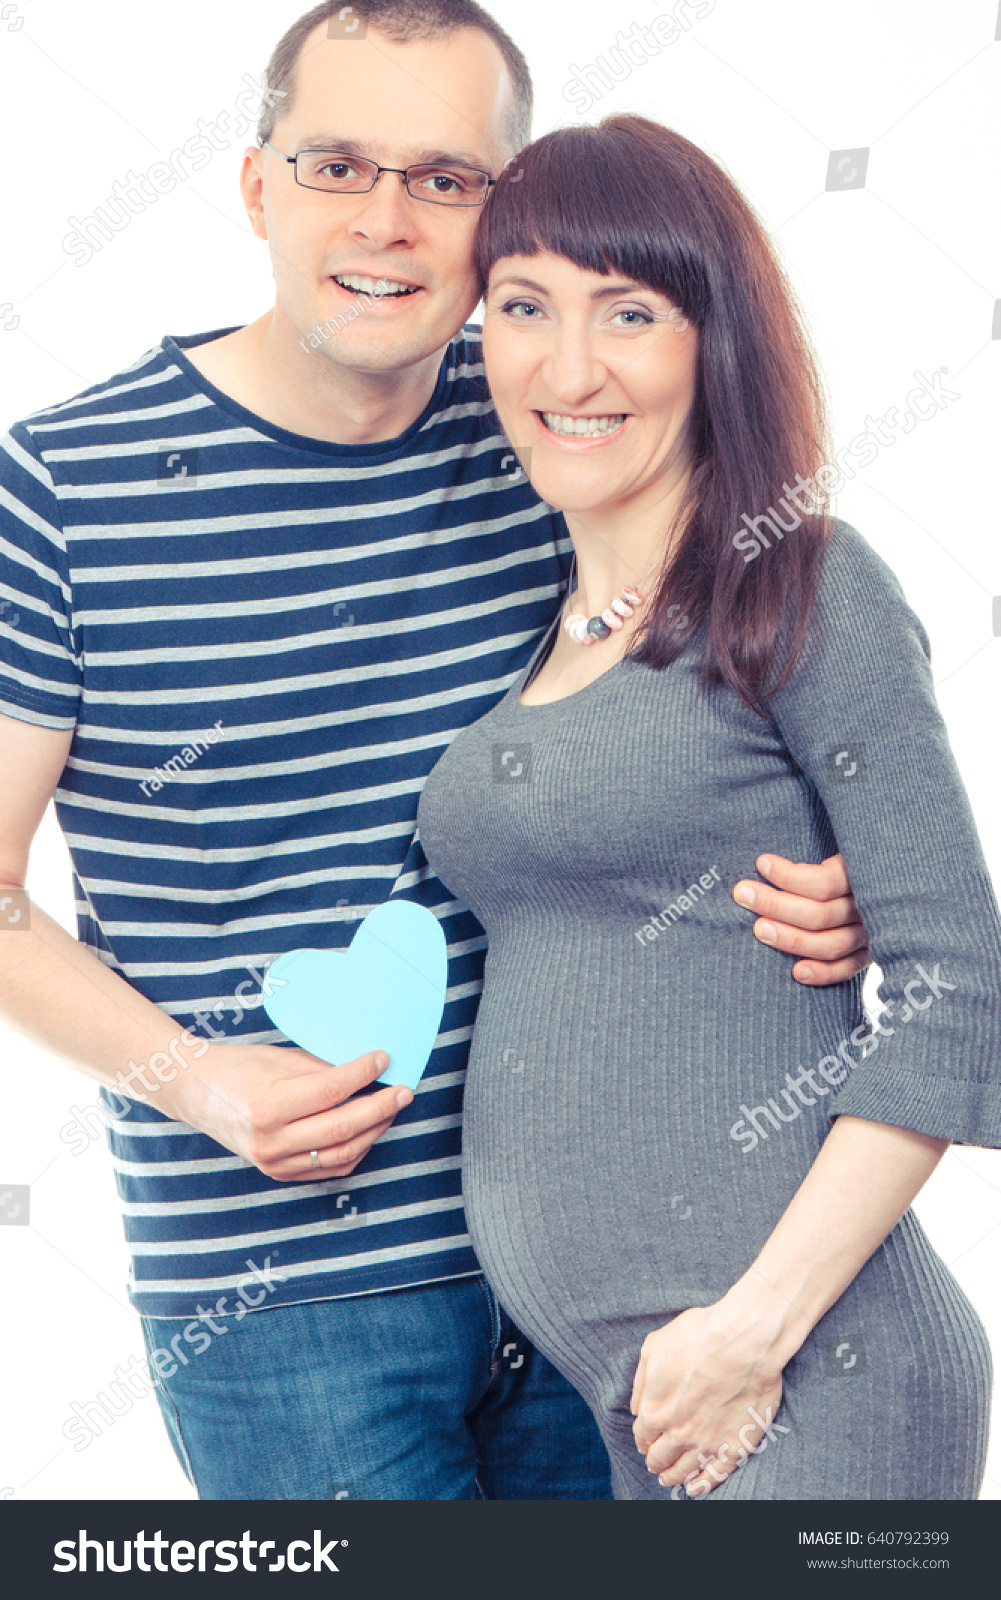 Vintage photo, Happy smiling pregnant woman and her husband with heart of paper, concept of extending family and expecting for newborn #640792399